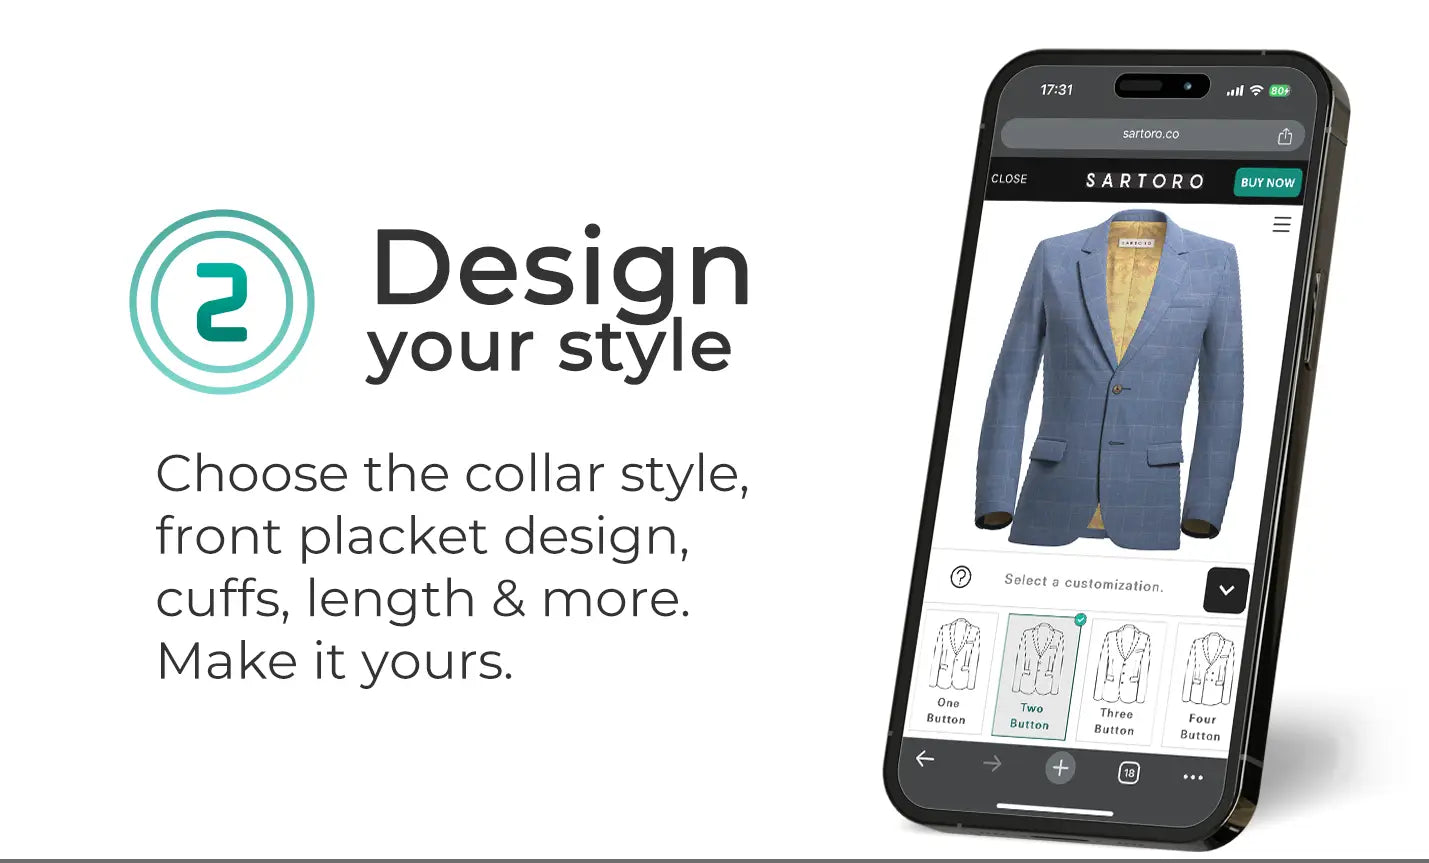 Design your style. Choose the collar style, front placket design, cuffs, length & more. Make it yours.